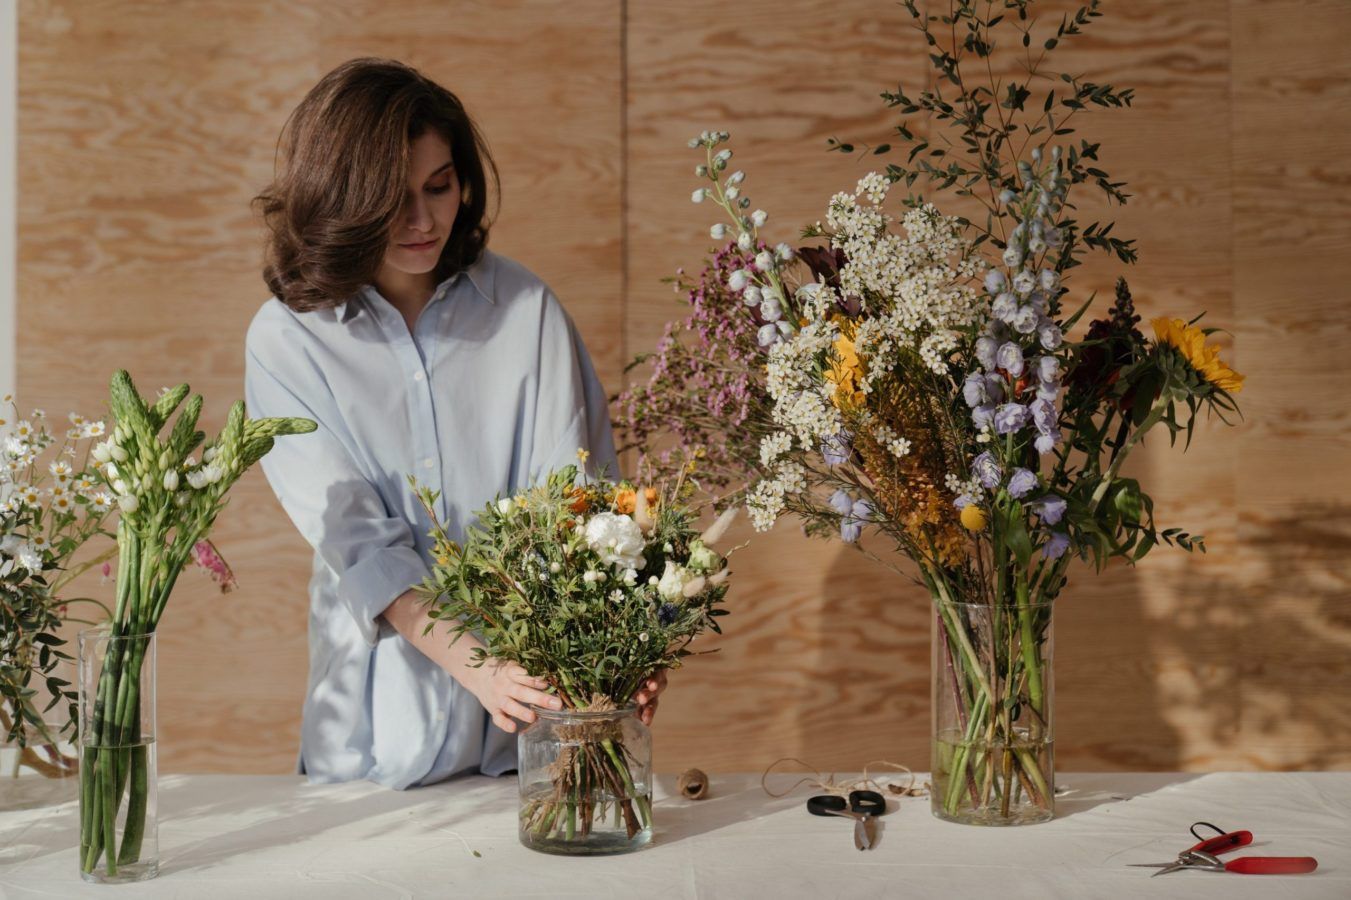 A simple guide to making beautiful floral arrangements at home